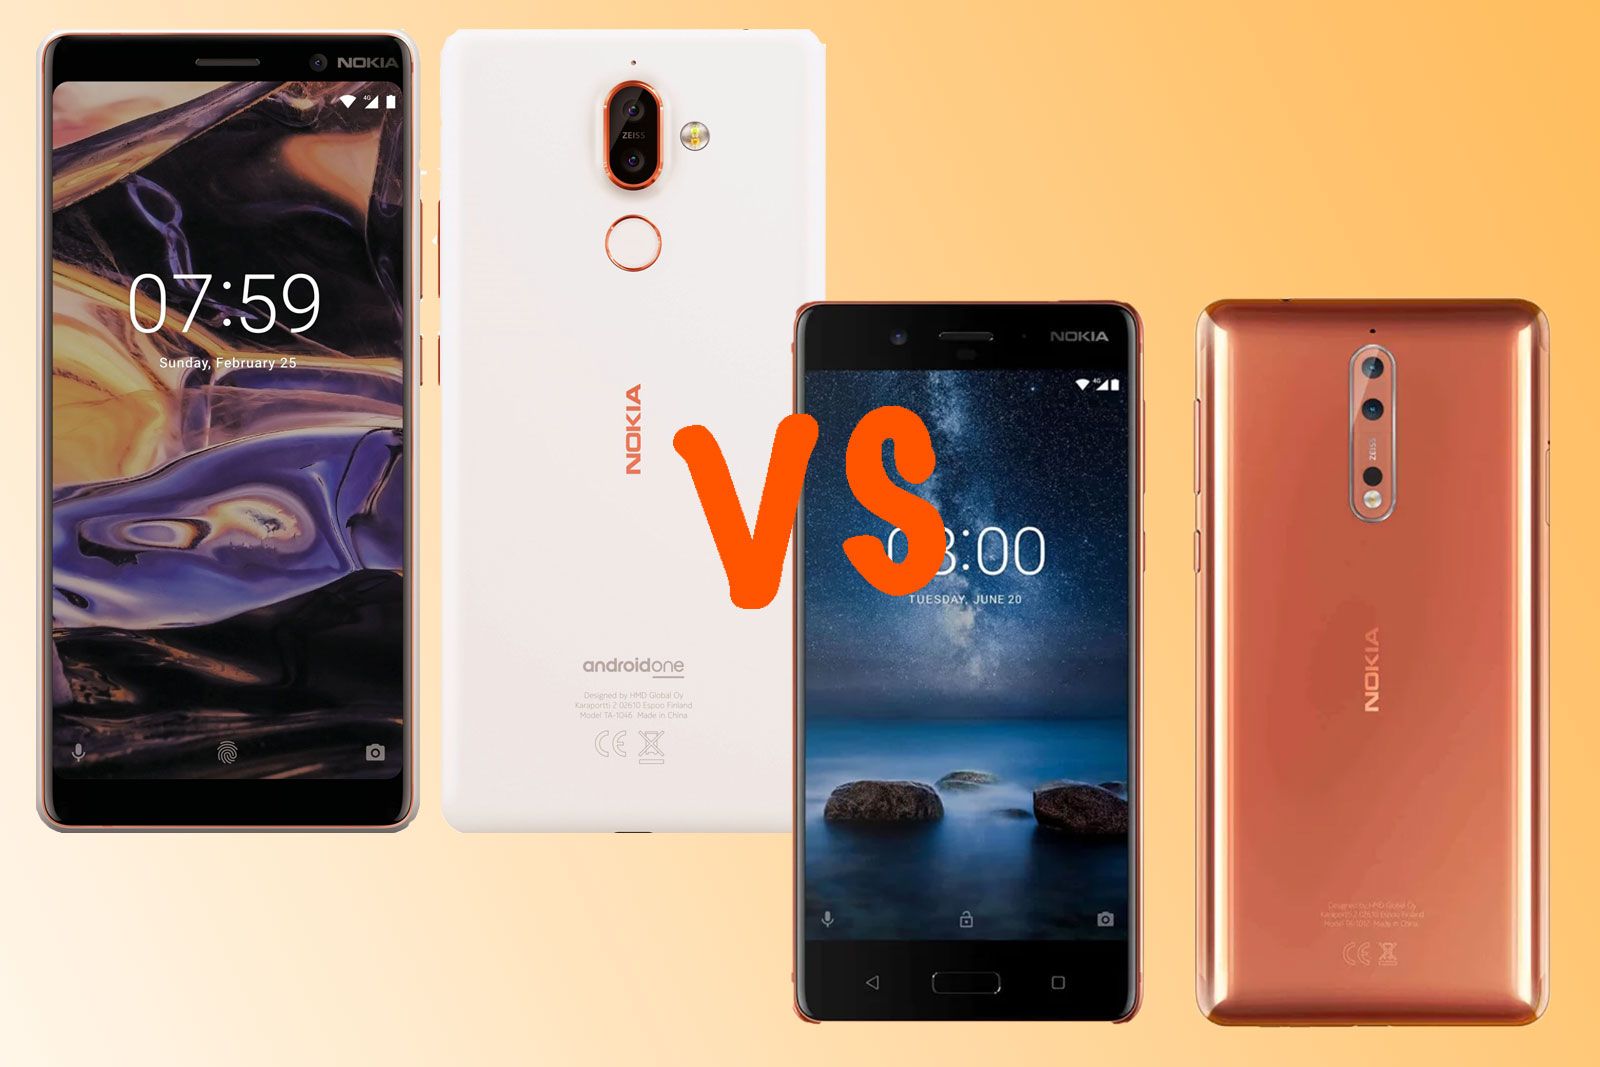 Nokia 8 Sirocco vs Nokia 8 Whats the difference image 1